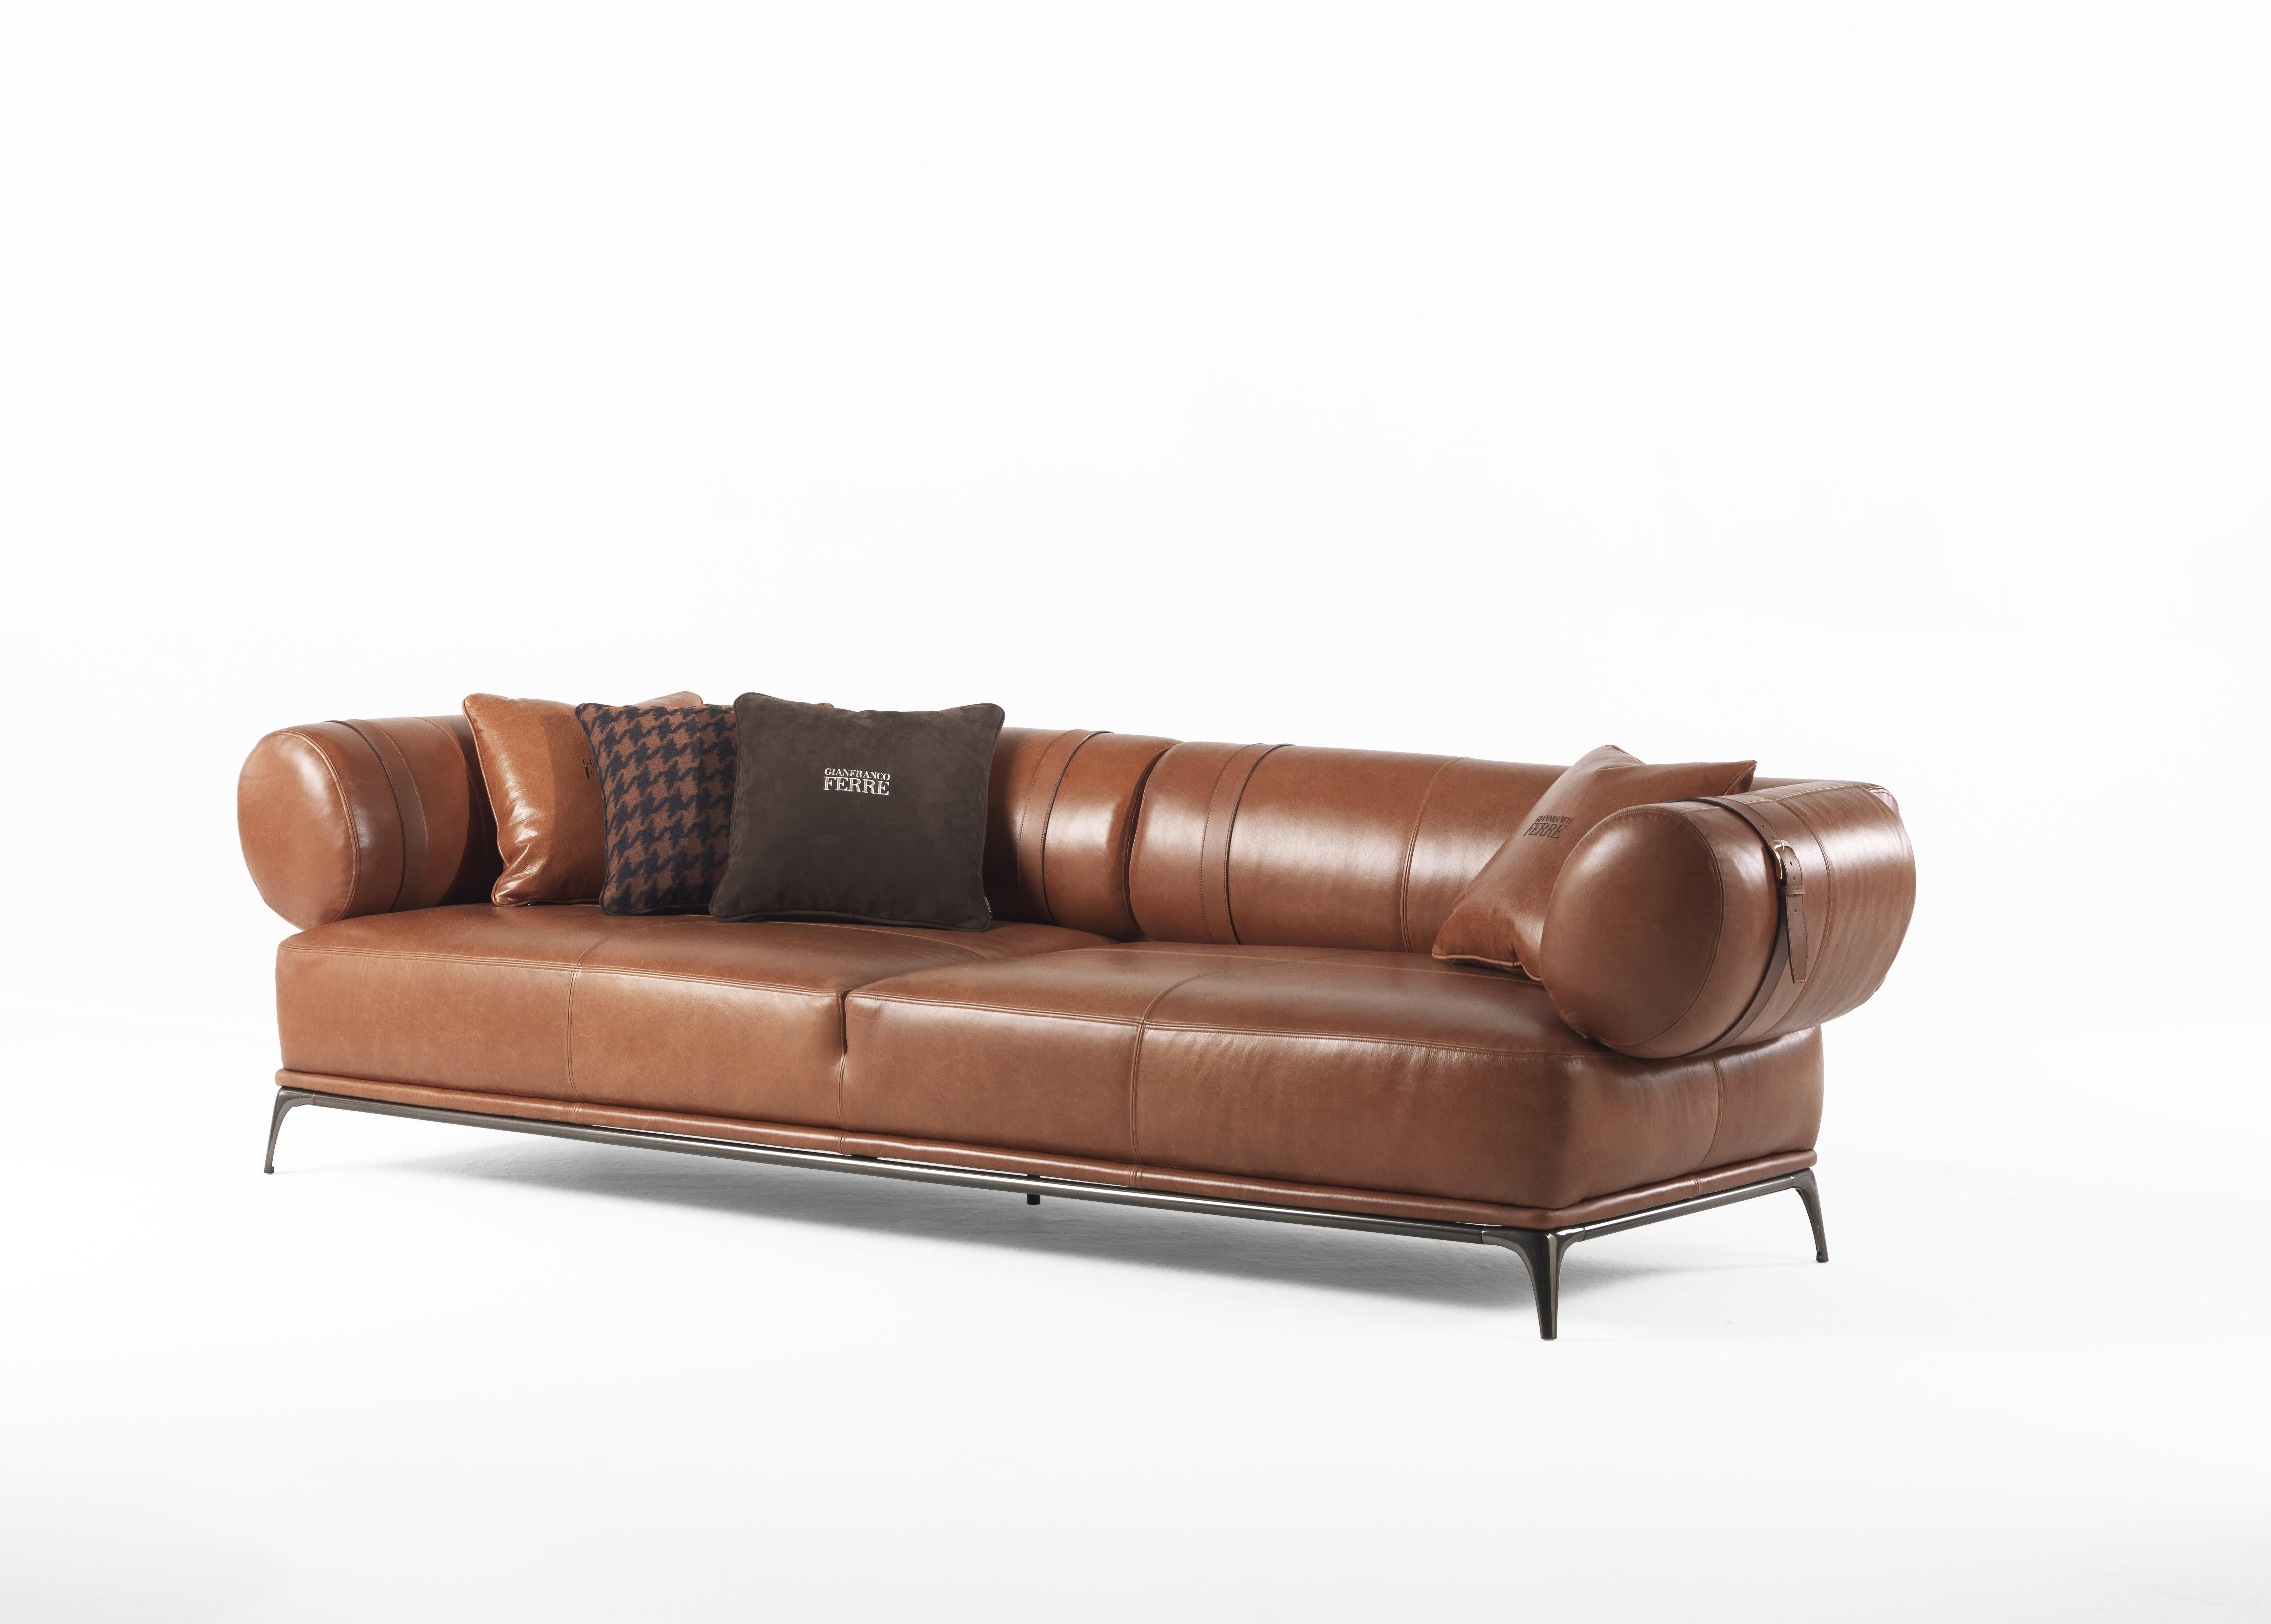 With its vintage charm, recognizable style and elegant silhouette, phoenix sofa refers to the icons of design, offering an original re-interpretation of the Classic roll arm. Featuring armrests and back with oval section, slightly inclined towards